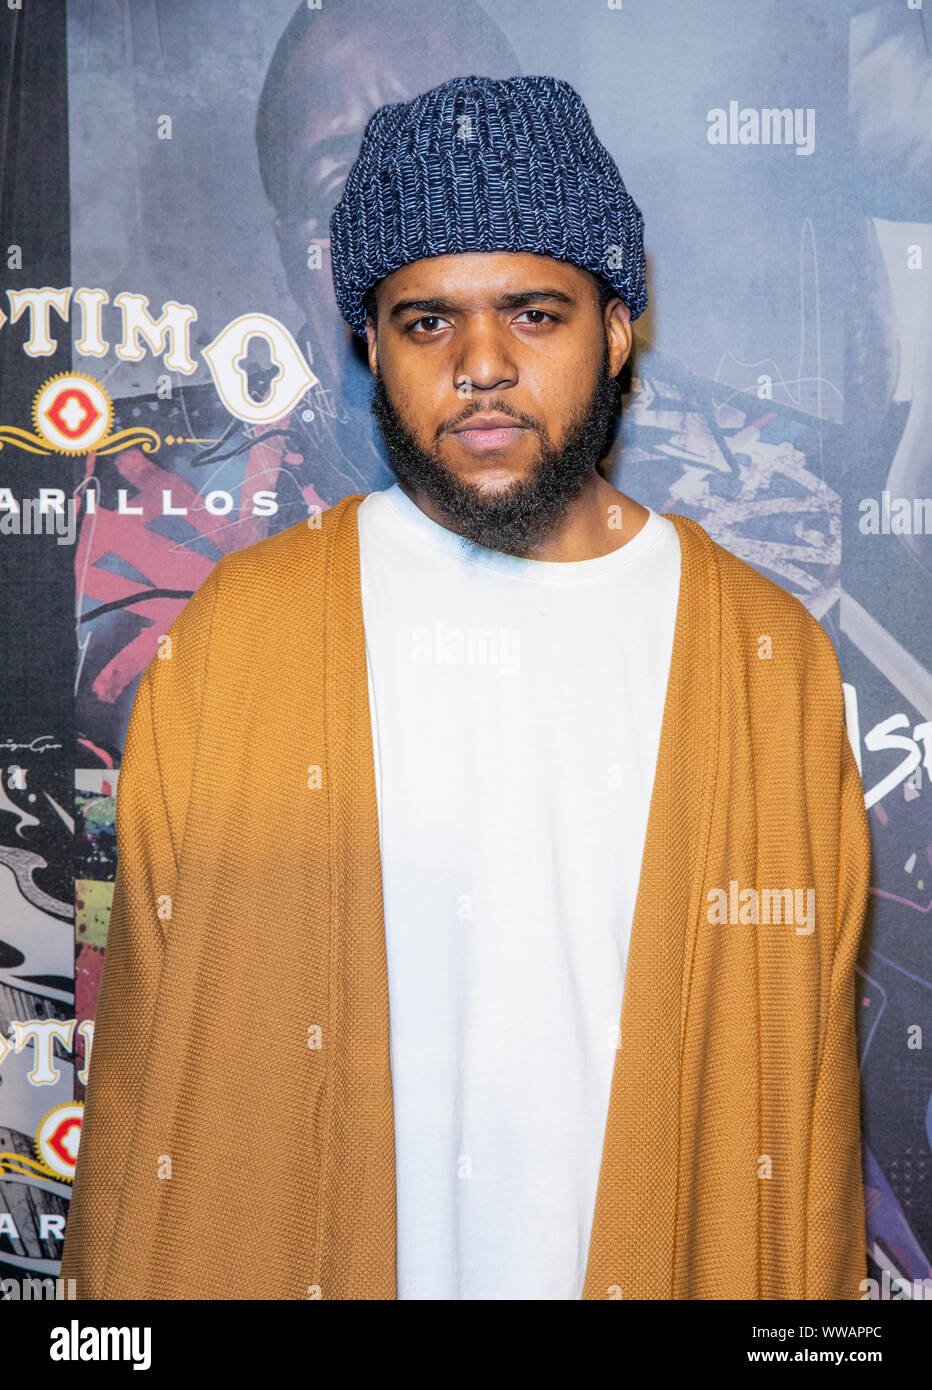 New York, NY - September 13, 2019: Christopher Jordan Wallace attends Optimo Celebrates The Notorious B.I.G. with “Biggie Inspires” Mural Unveil Art Exhibit & Celebration at William Vale Hotel Stock Photo